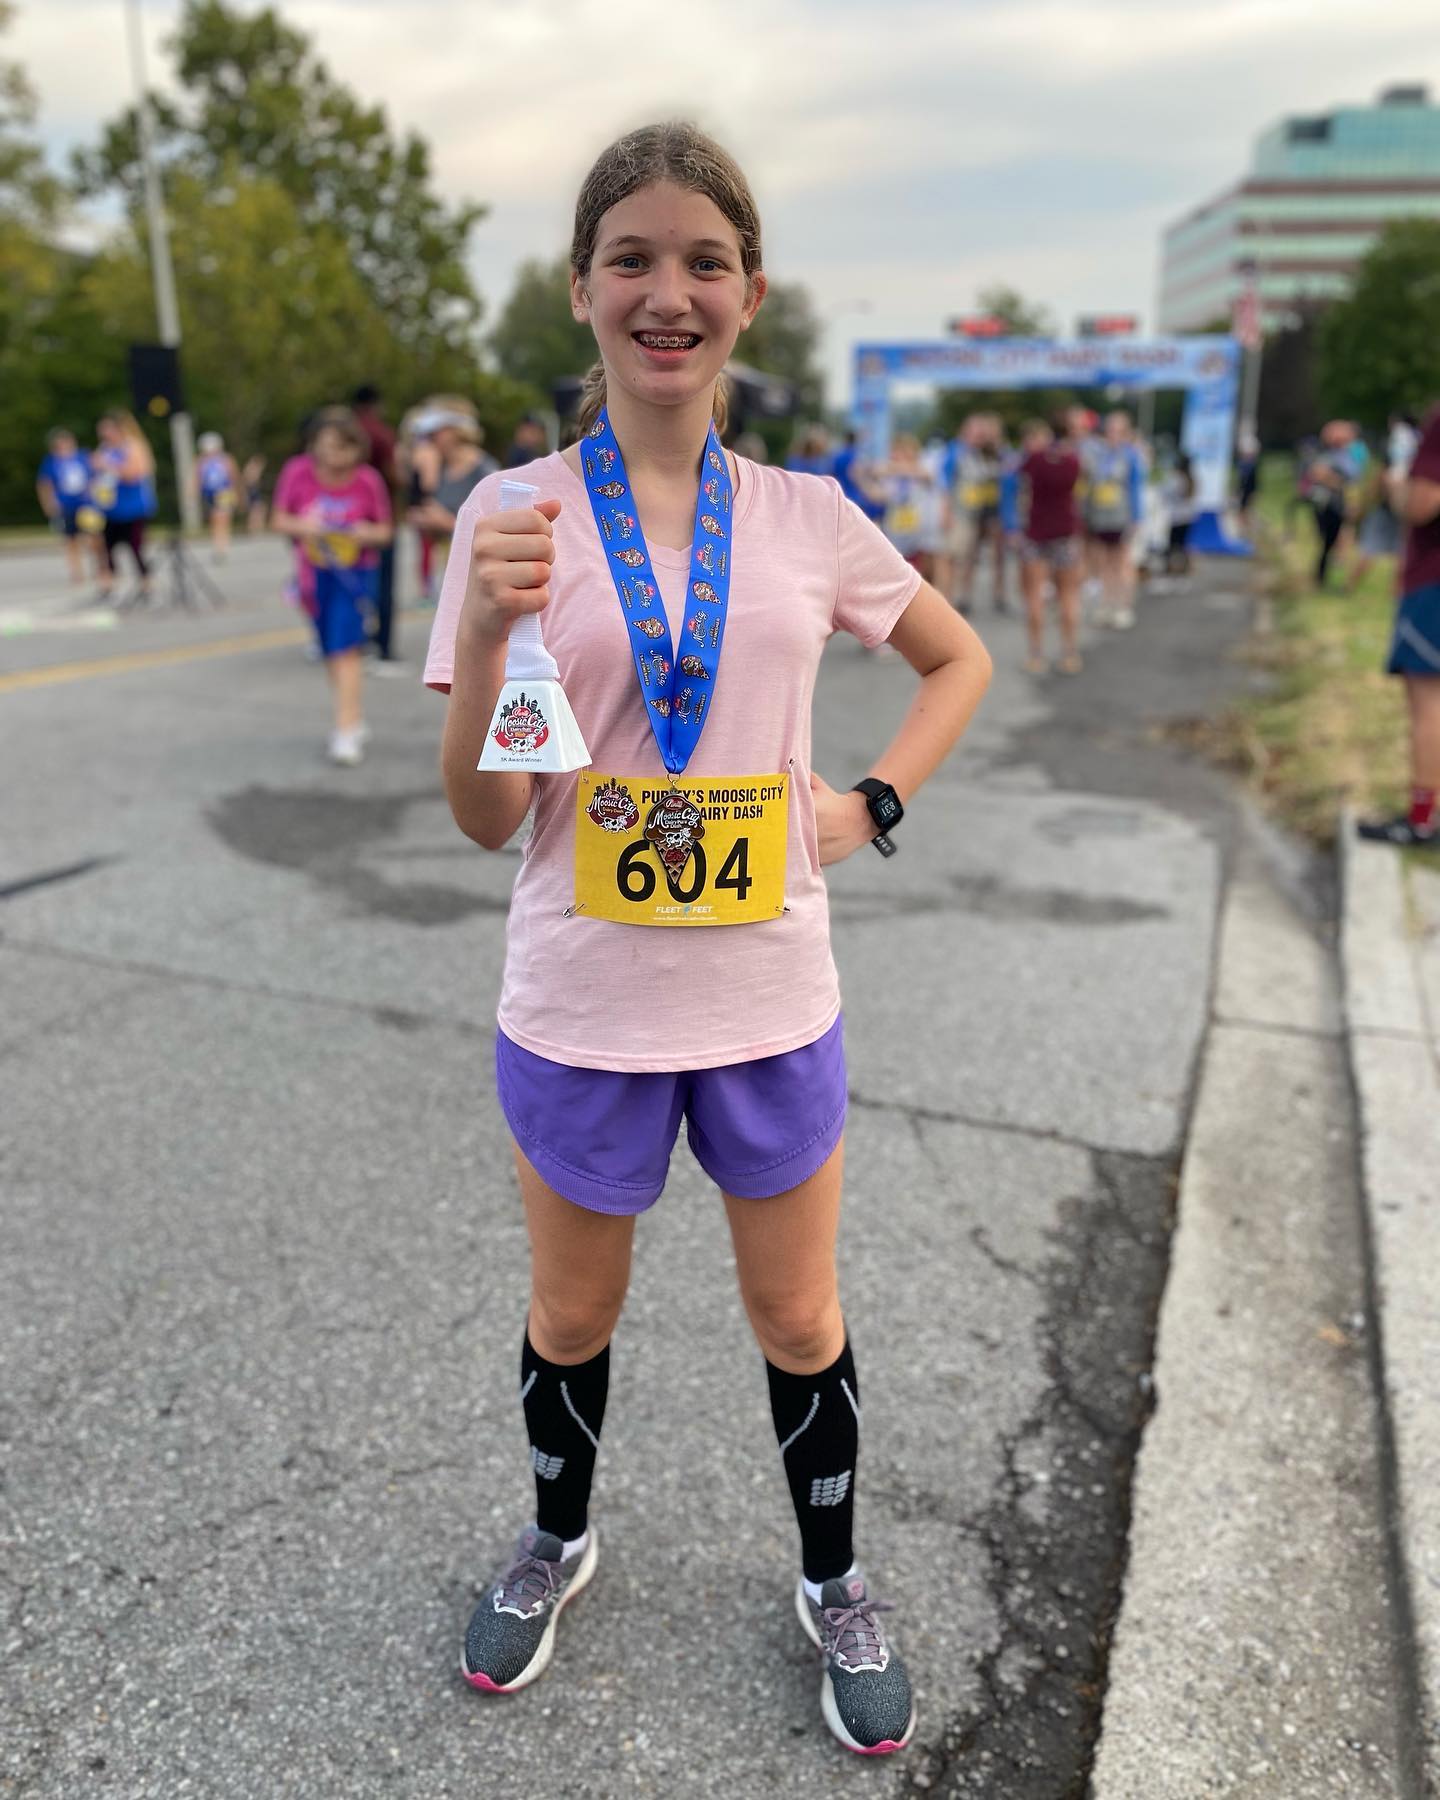 Purity Moosic City 5K is in the books. Sara finished 2nd in her age group and was the 24th female overall out of 420+ participants…all of this on a leg that she strained earlier in the week. It was a lot of fun to run and finish with her. So proud. #family #running